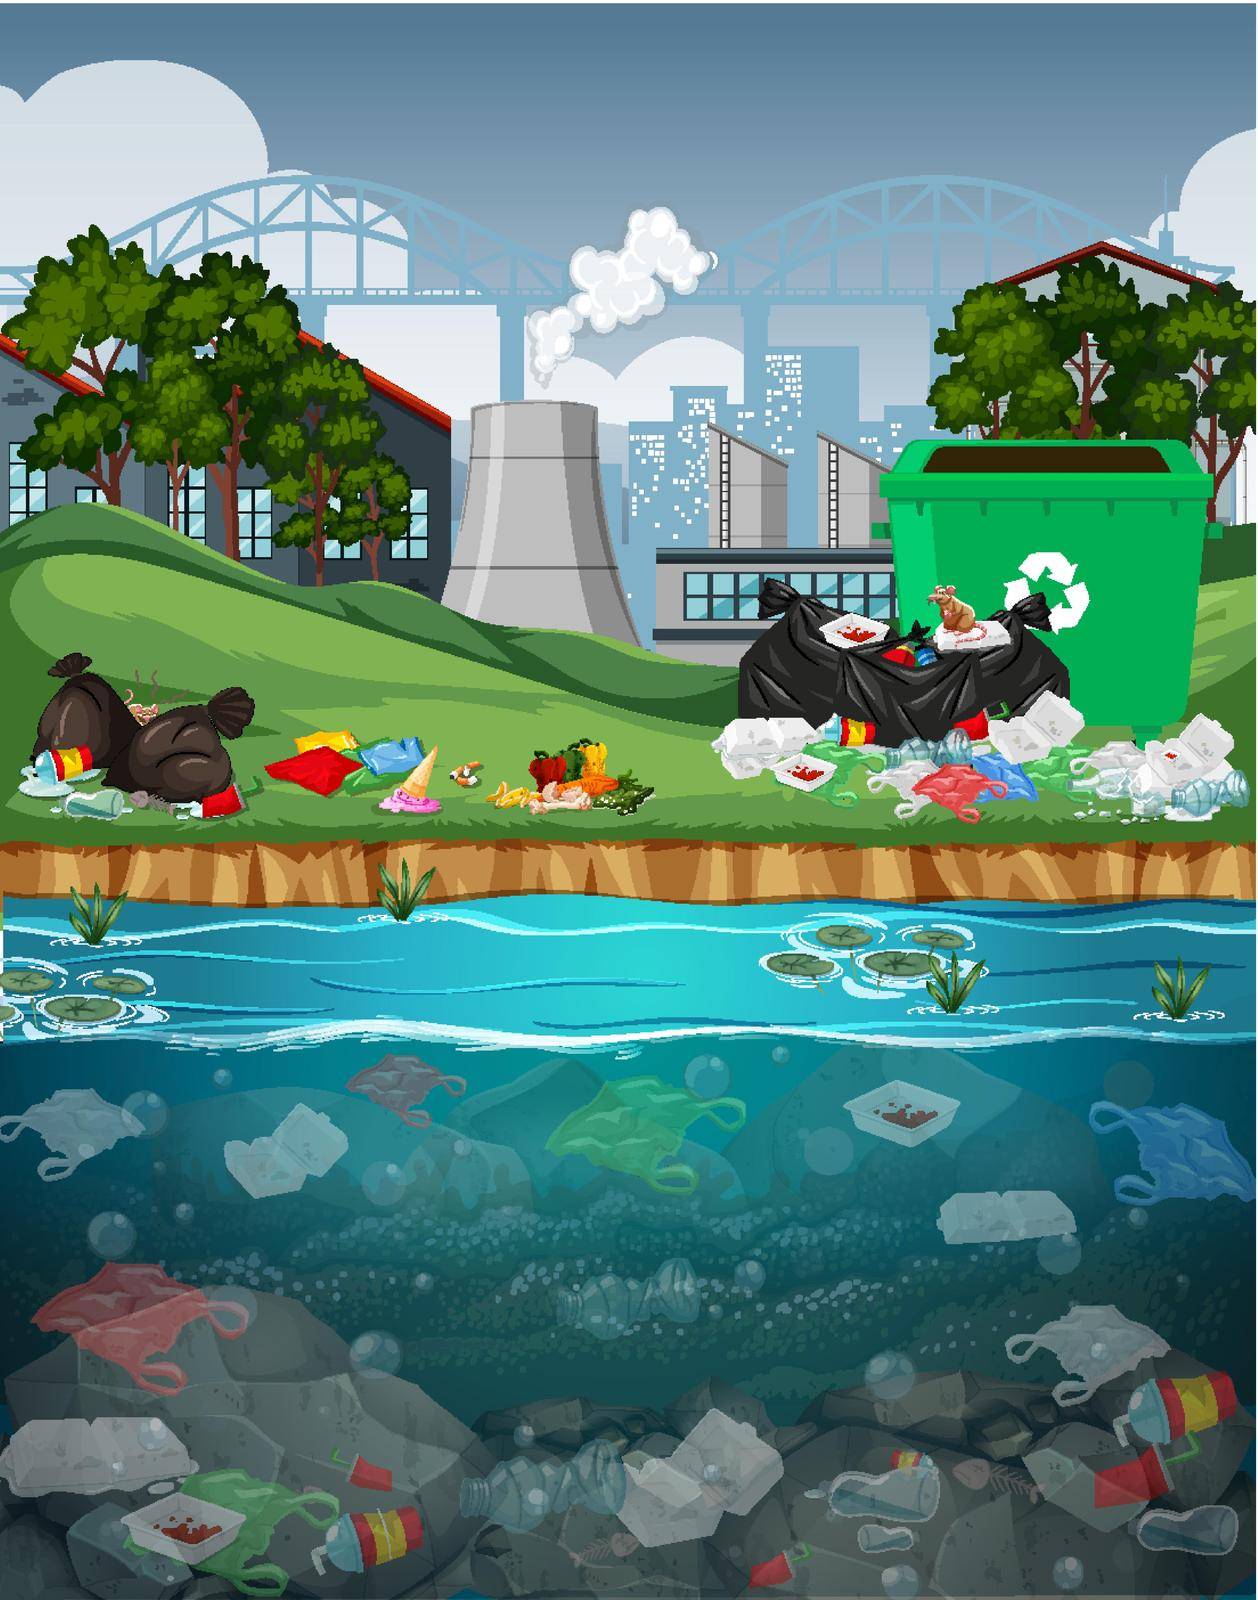 Water pollution with plastic bags in river illustration